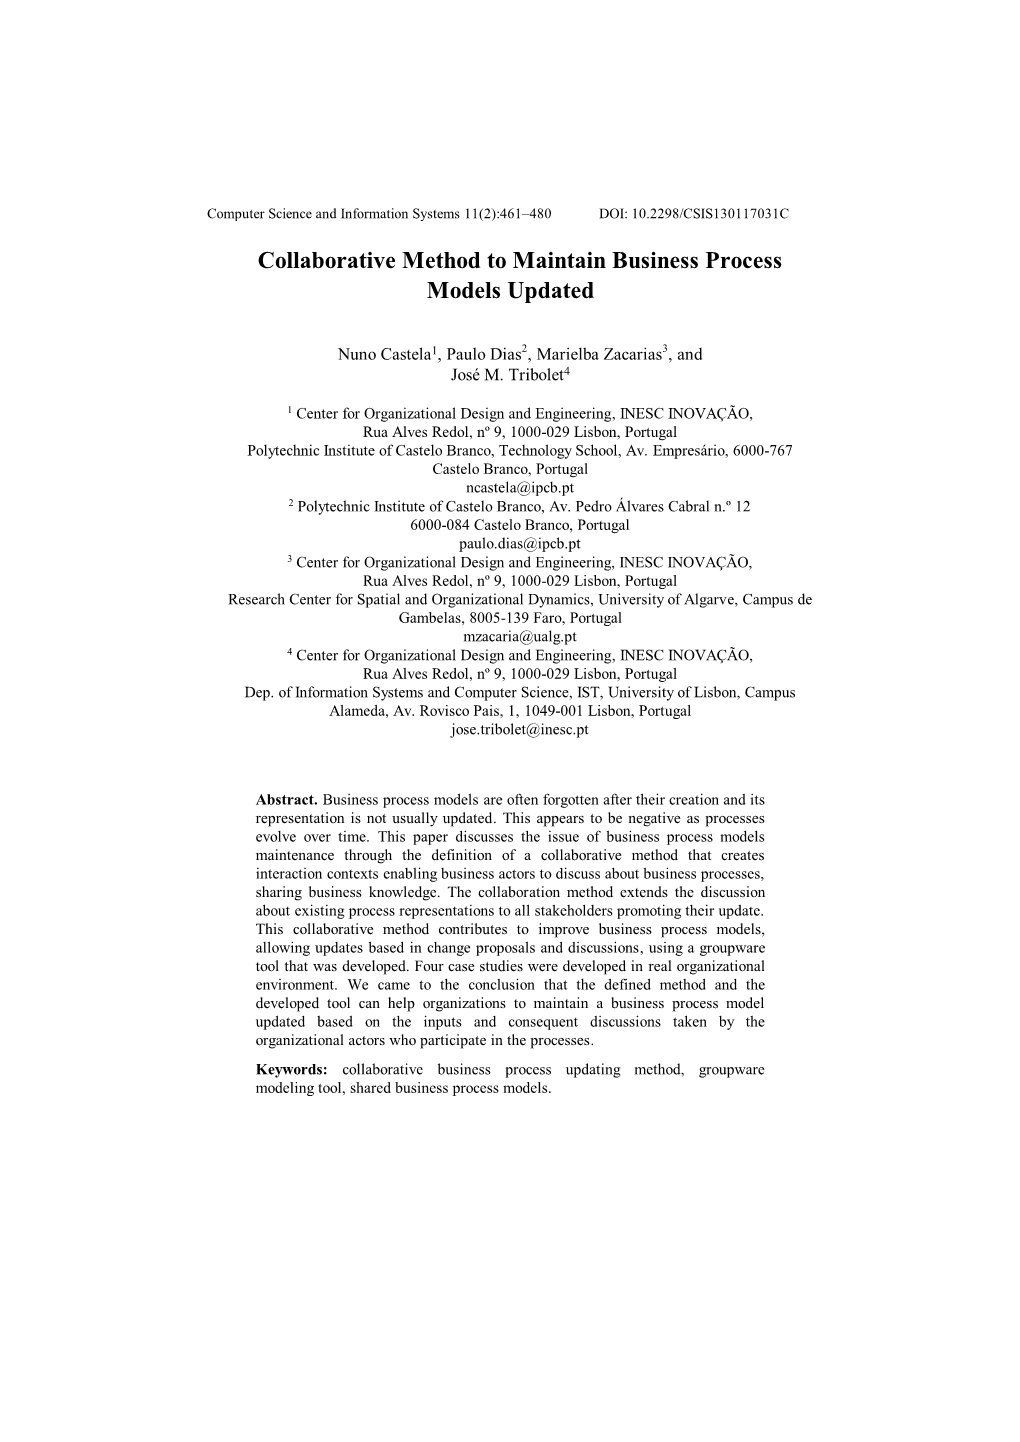 Collaborative Method to Maintain Business Process Models Updated